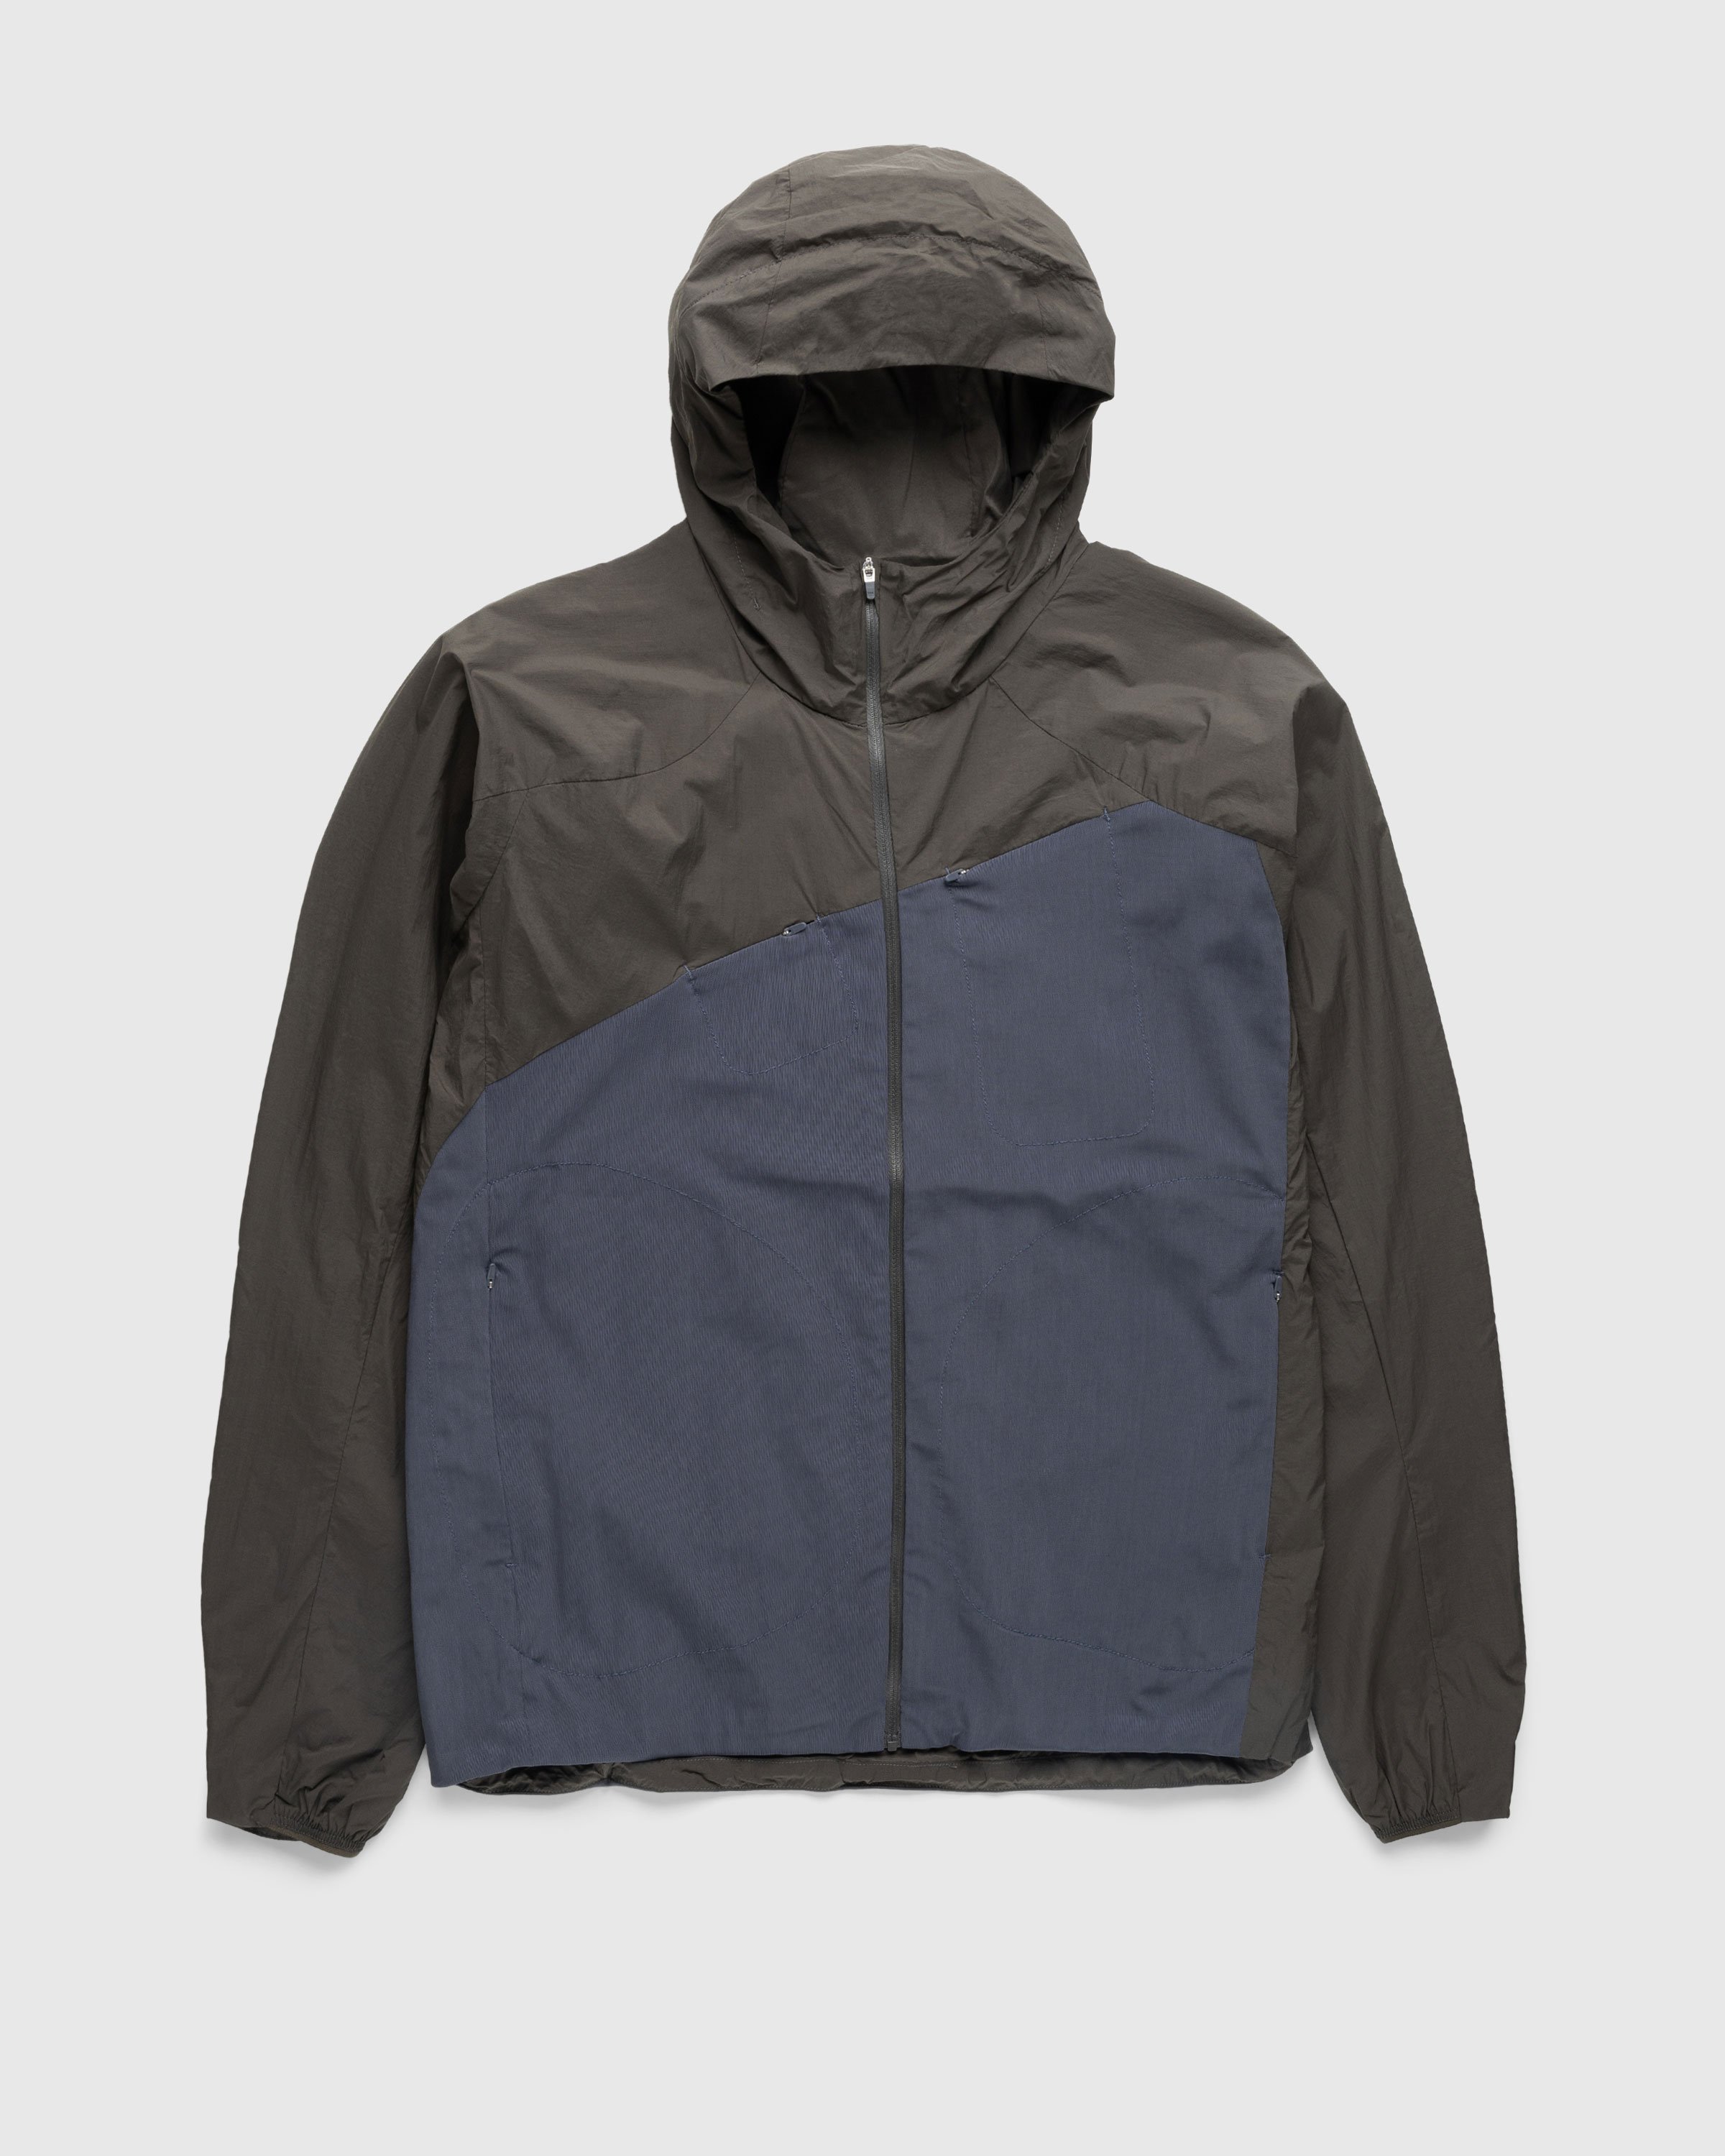 Post Archive Faction (PAF) - 5.1 TECHNICAL JACKET CENTER - Clothing - Brown - Image 1